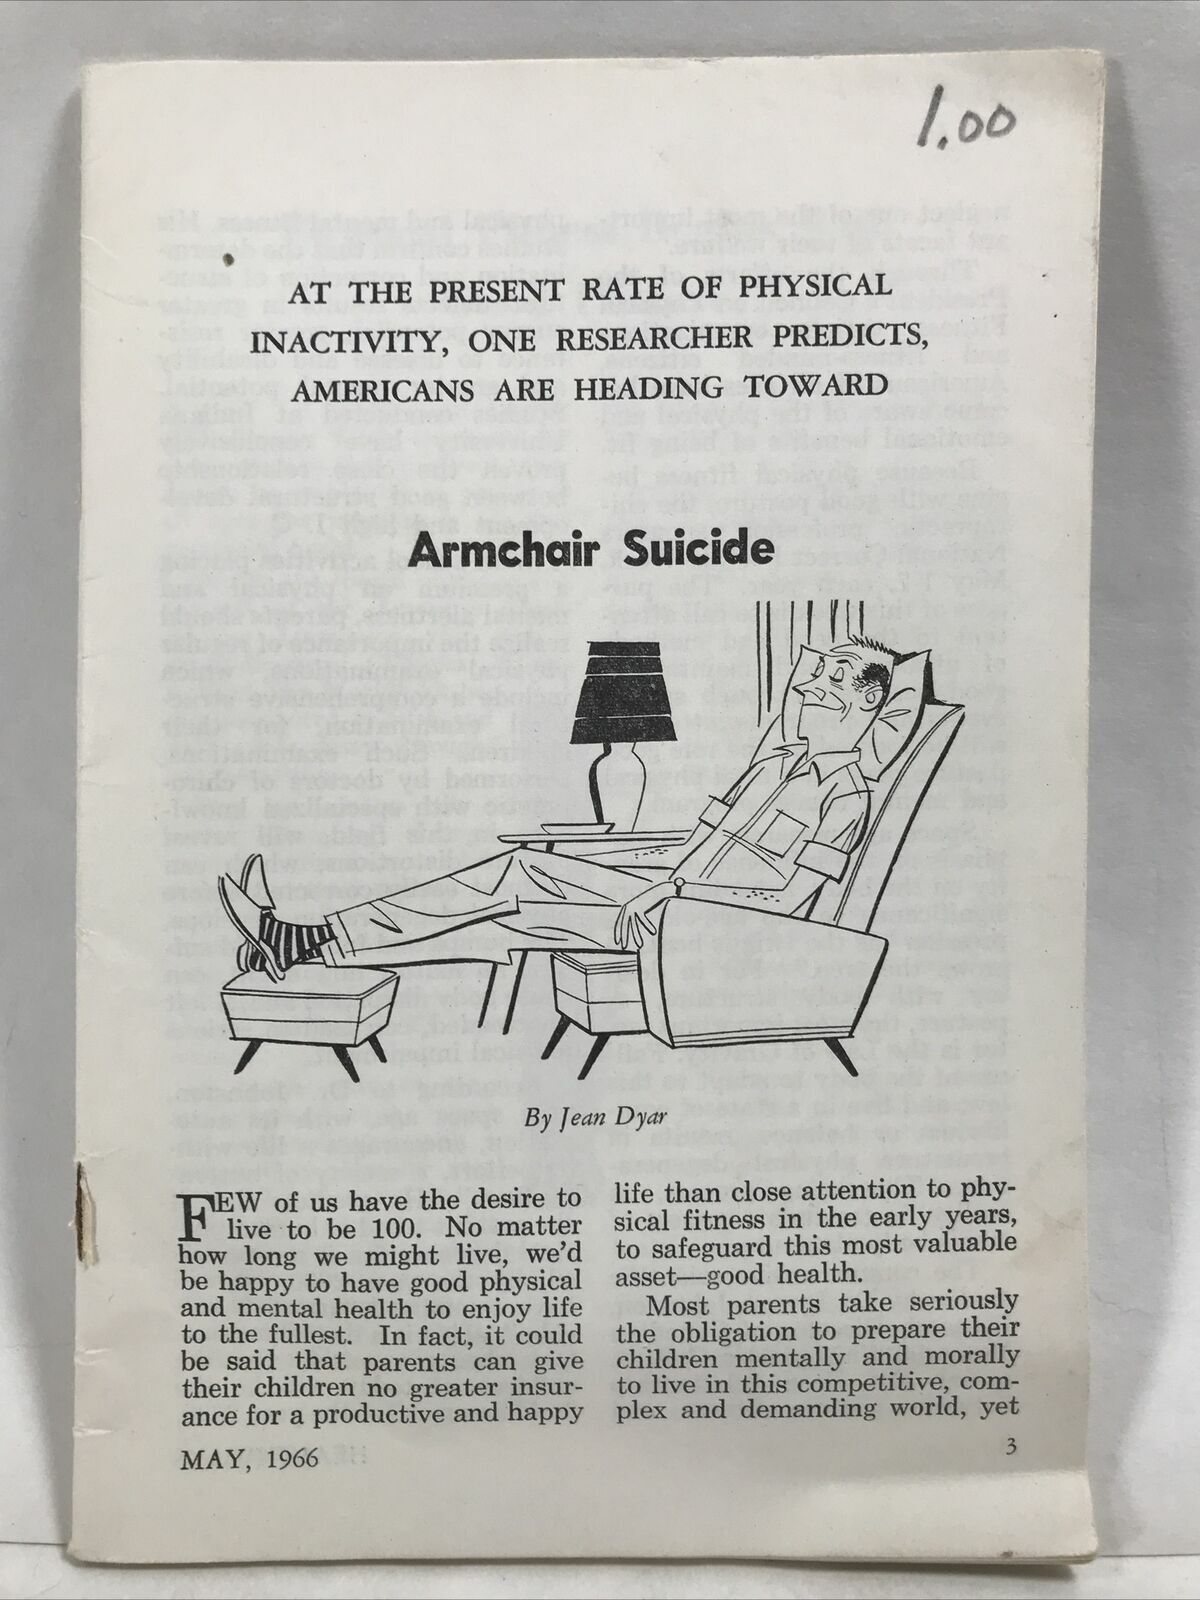 1966 Physical Inactivity Americans Heading Toward ARMCHAIR SUICIDE by Jean Dyar